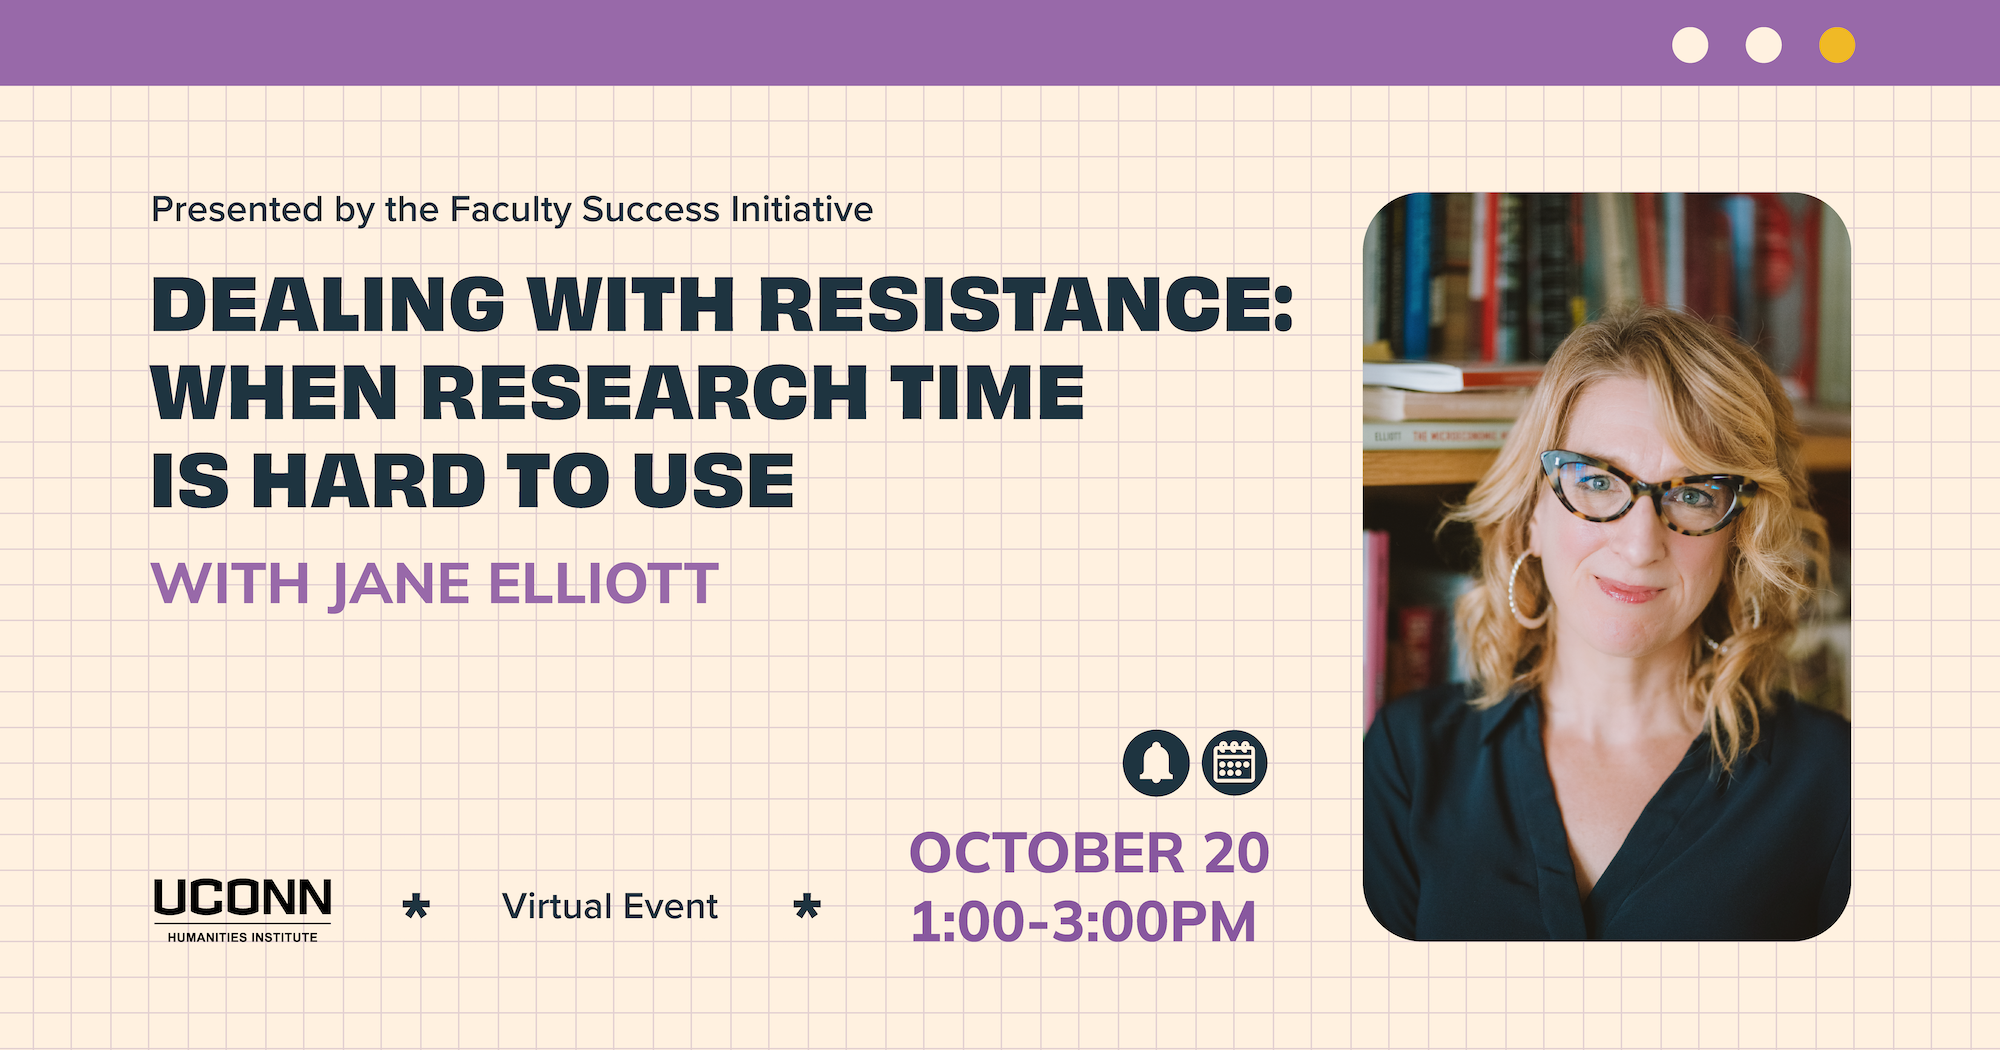 Presented by the Faculty Success Initiative, Dealing With Resistance: When Research Time Is Hard To Use With Jane Elliott. Virtual event. October 20, 1:00–3:00pm.